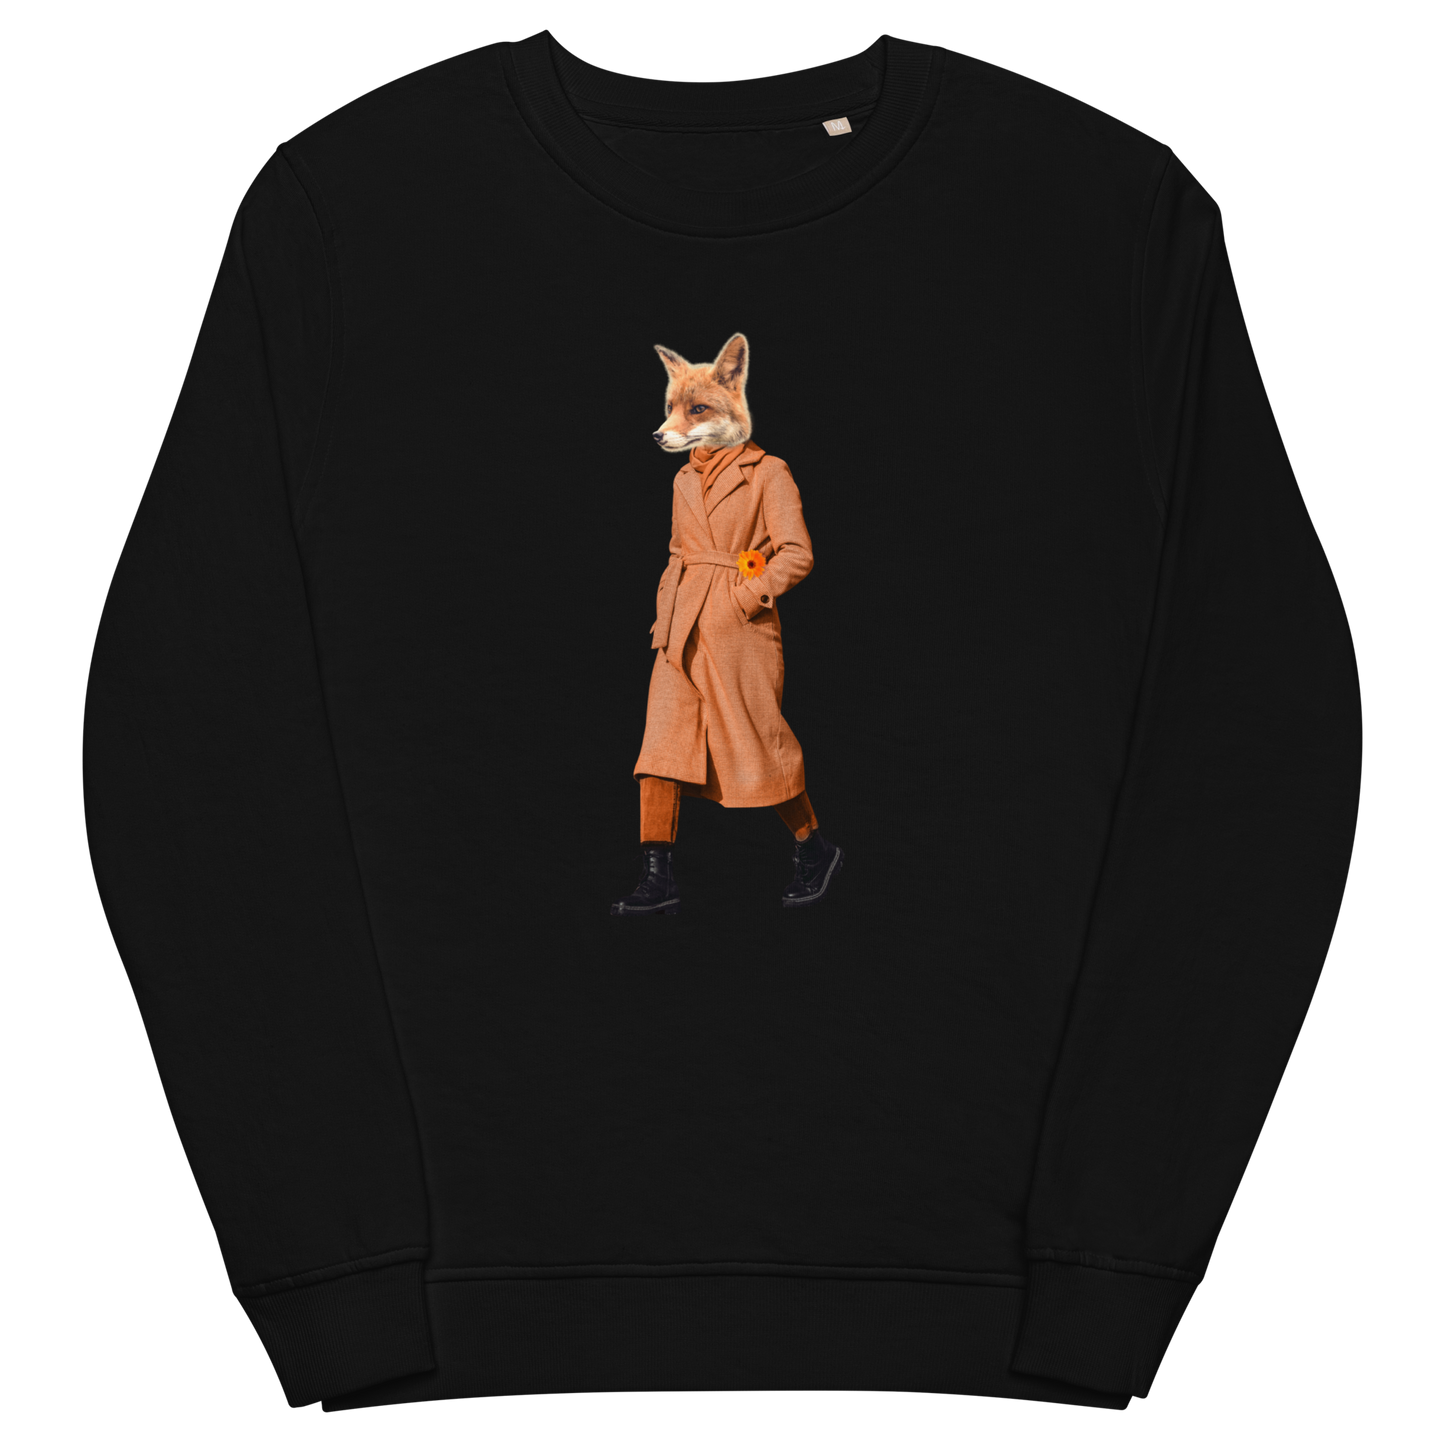 Black Organic Cotton Anthropomorphic Fox Sweatshirt showcasing a sly Anthropomorphic Fox In a Trench Coat graphic on the chest - Cool Anthropomorphic Fox Graphic Sweatshirts - Boozy Fox